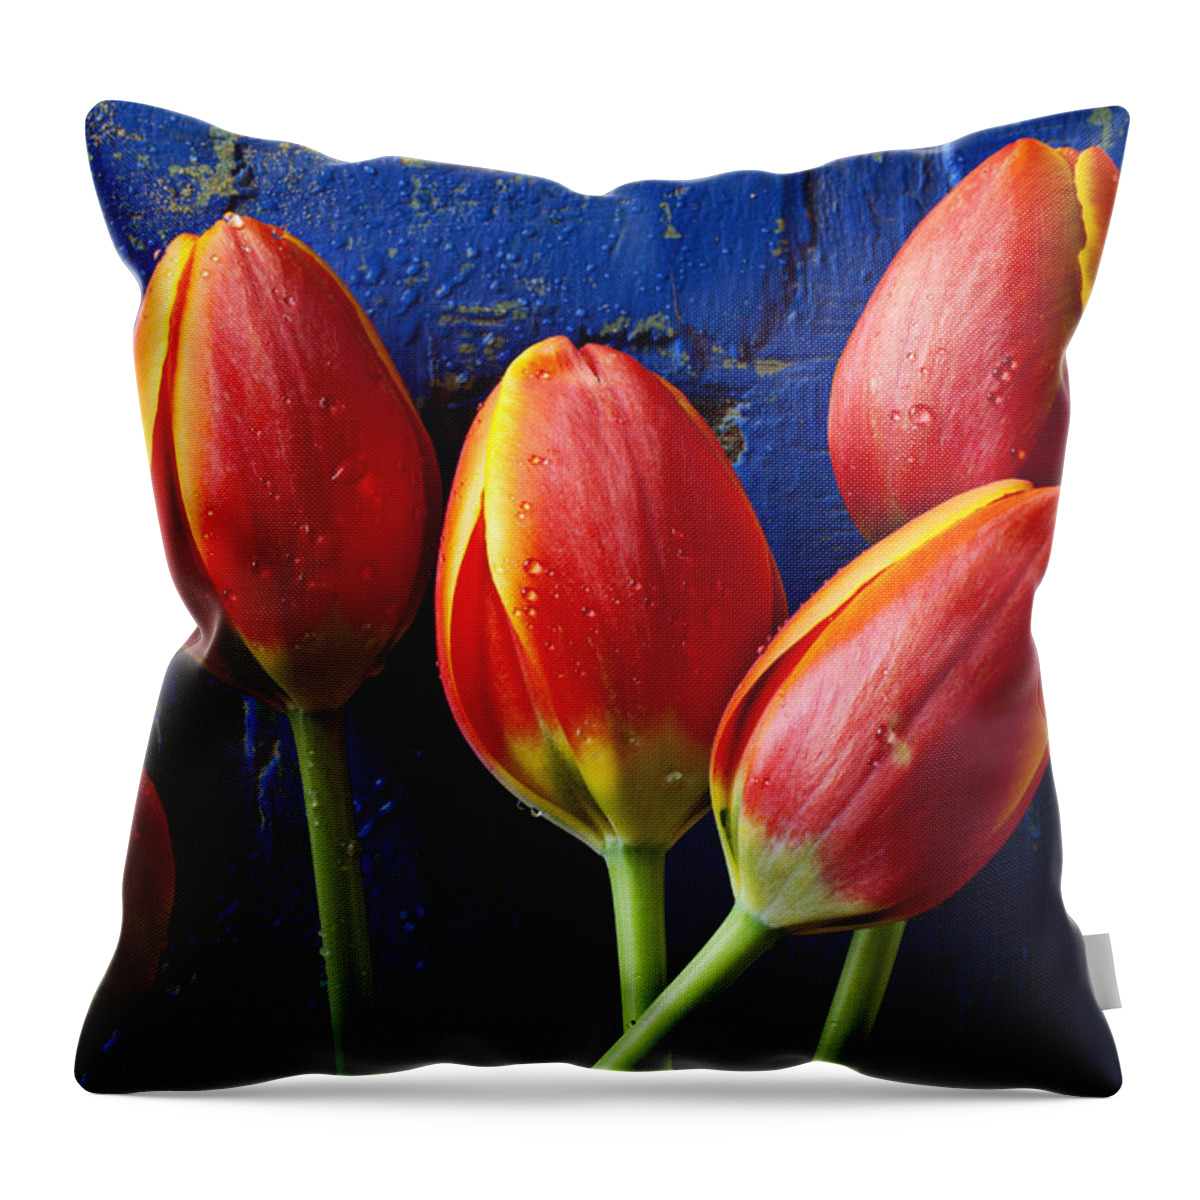 Four Throw Pillow featuring the photograph Four orange tulips by Garry Gay